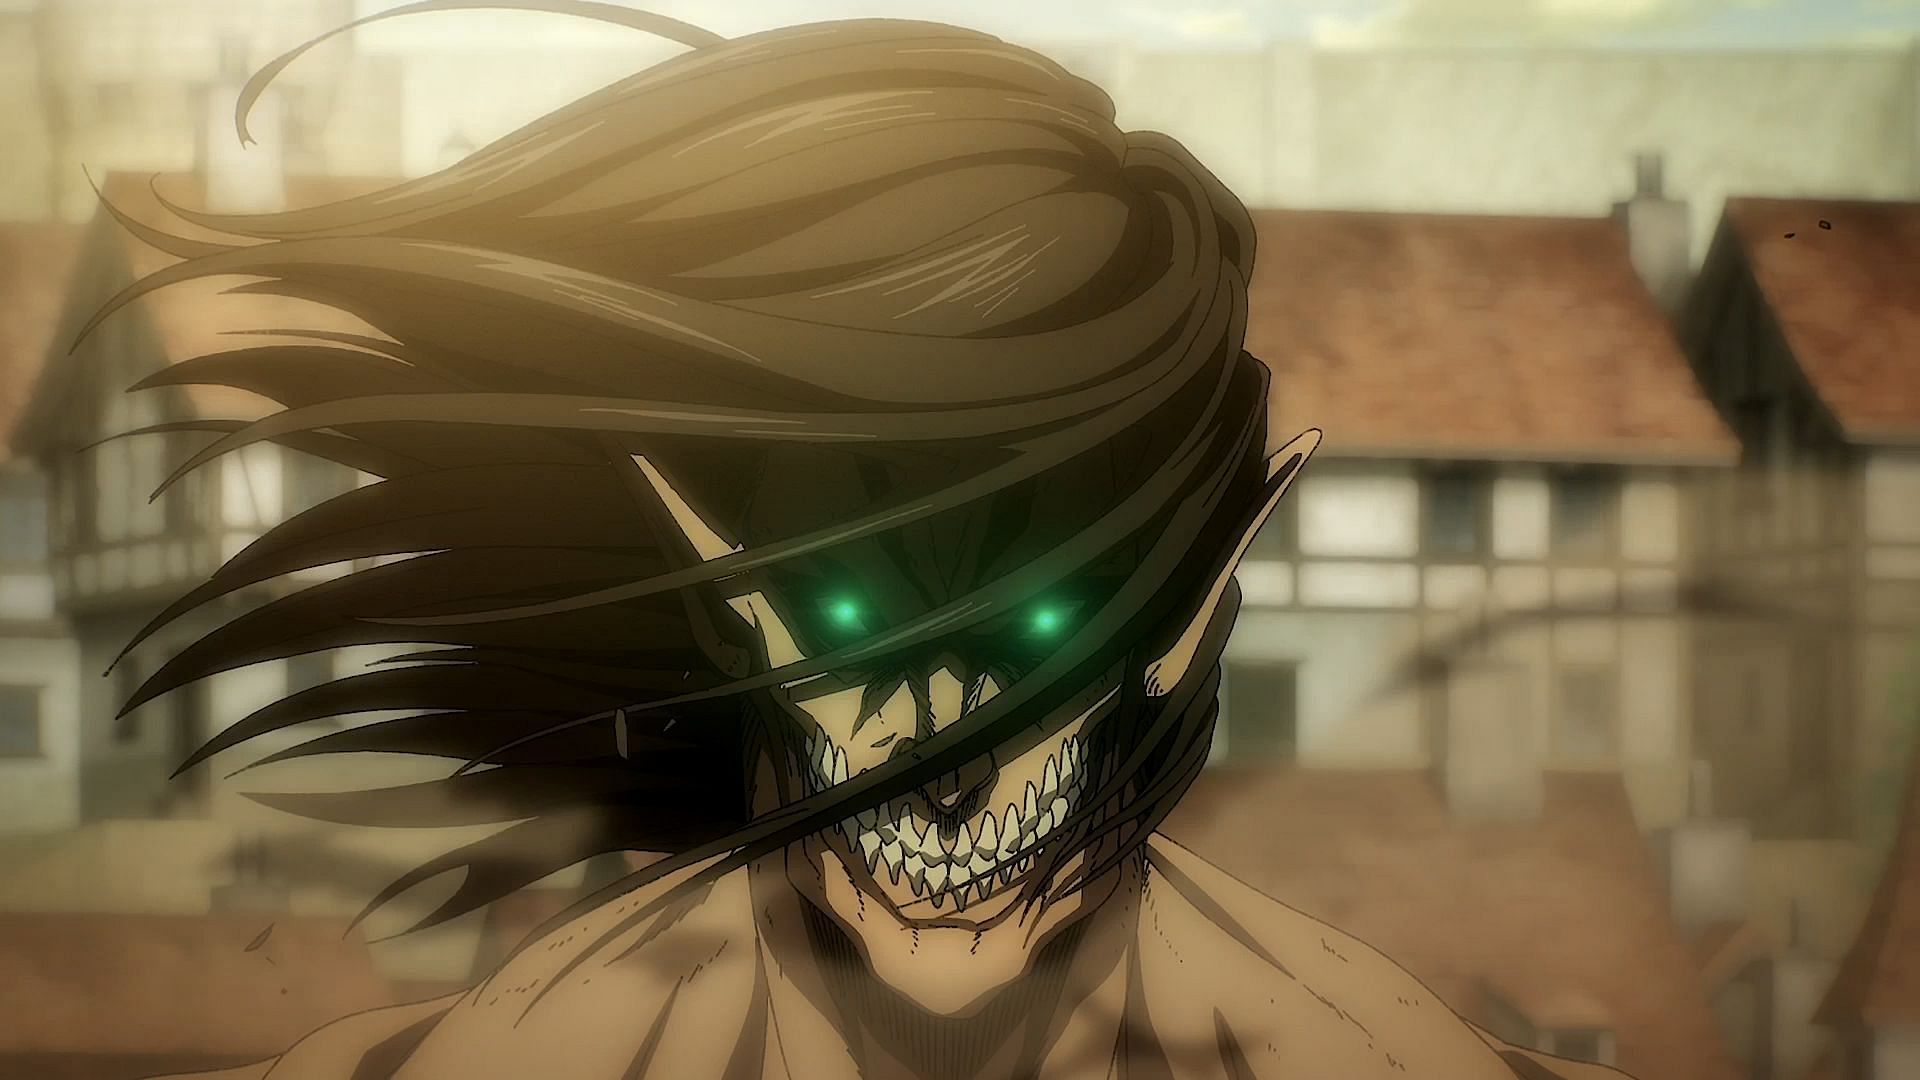 Attack on Titan is a good example of the horrors of war (Image via Hajime Isayama, Attack on Titan)